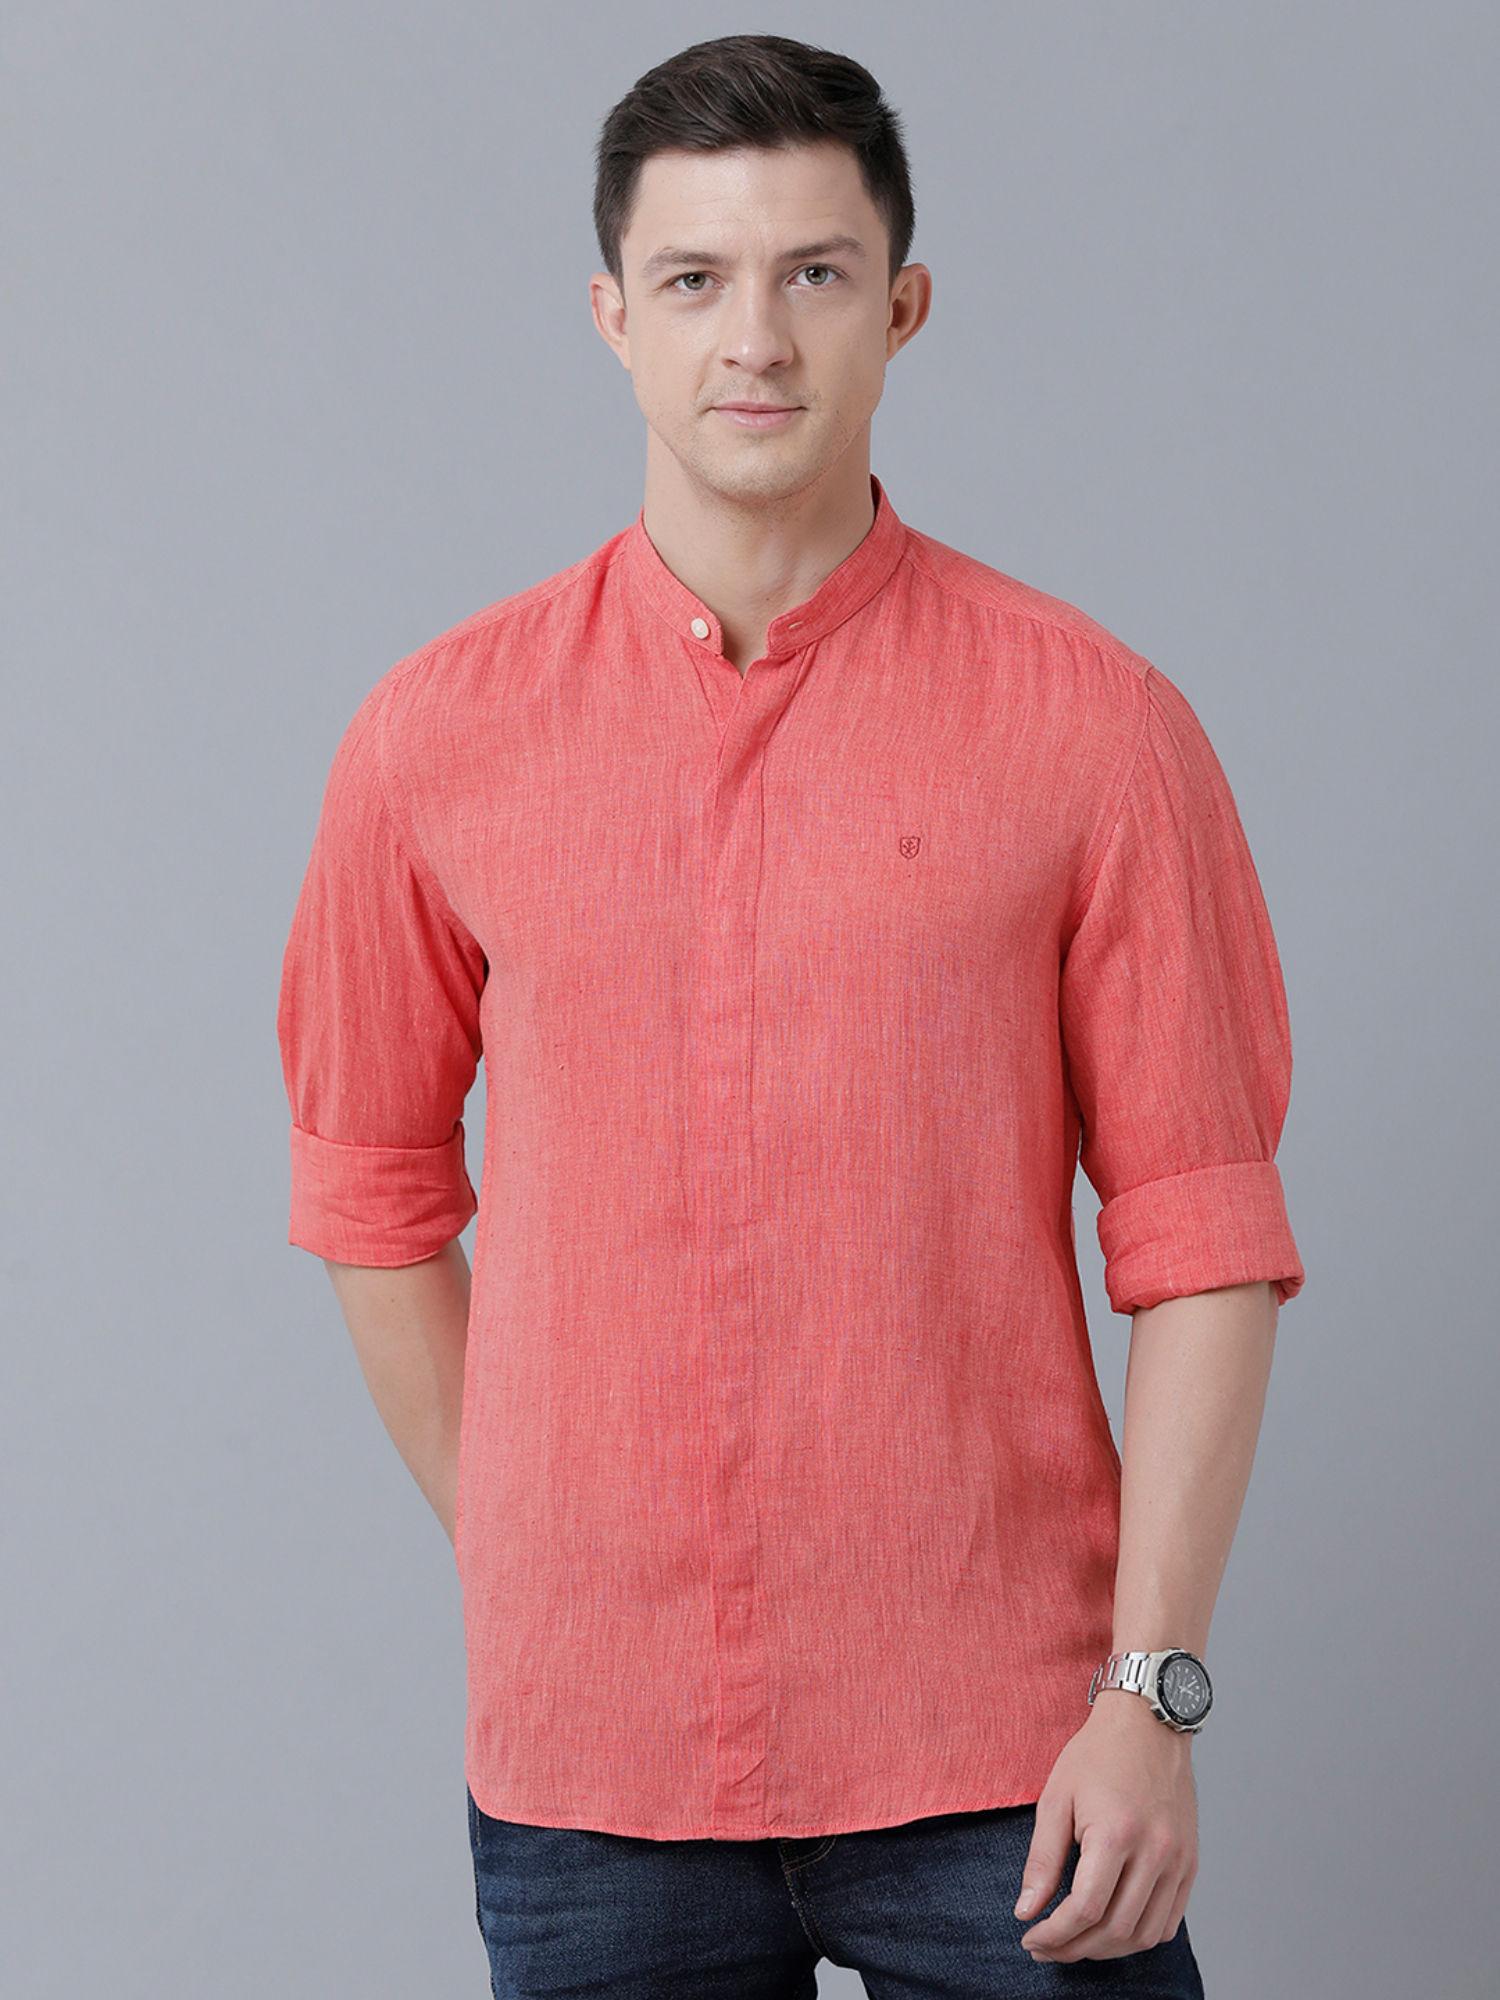 men's-pure-linen-red-chambray-regular-fit-full-sleeve-casual-shirt